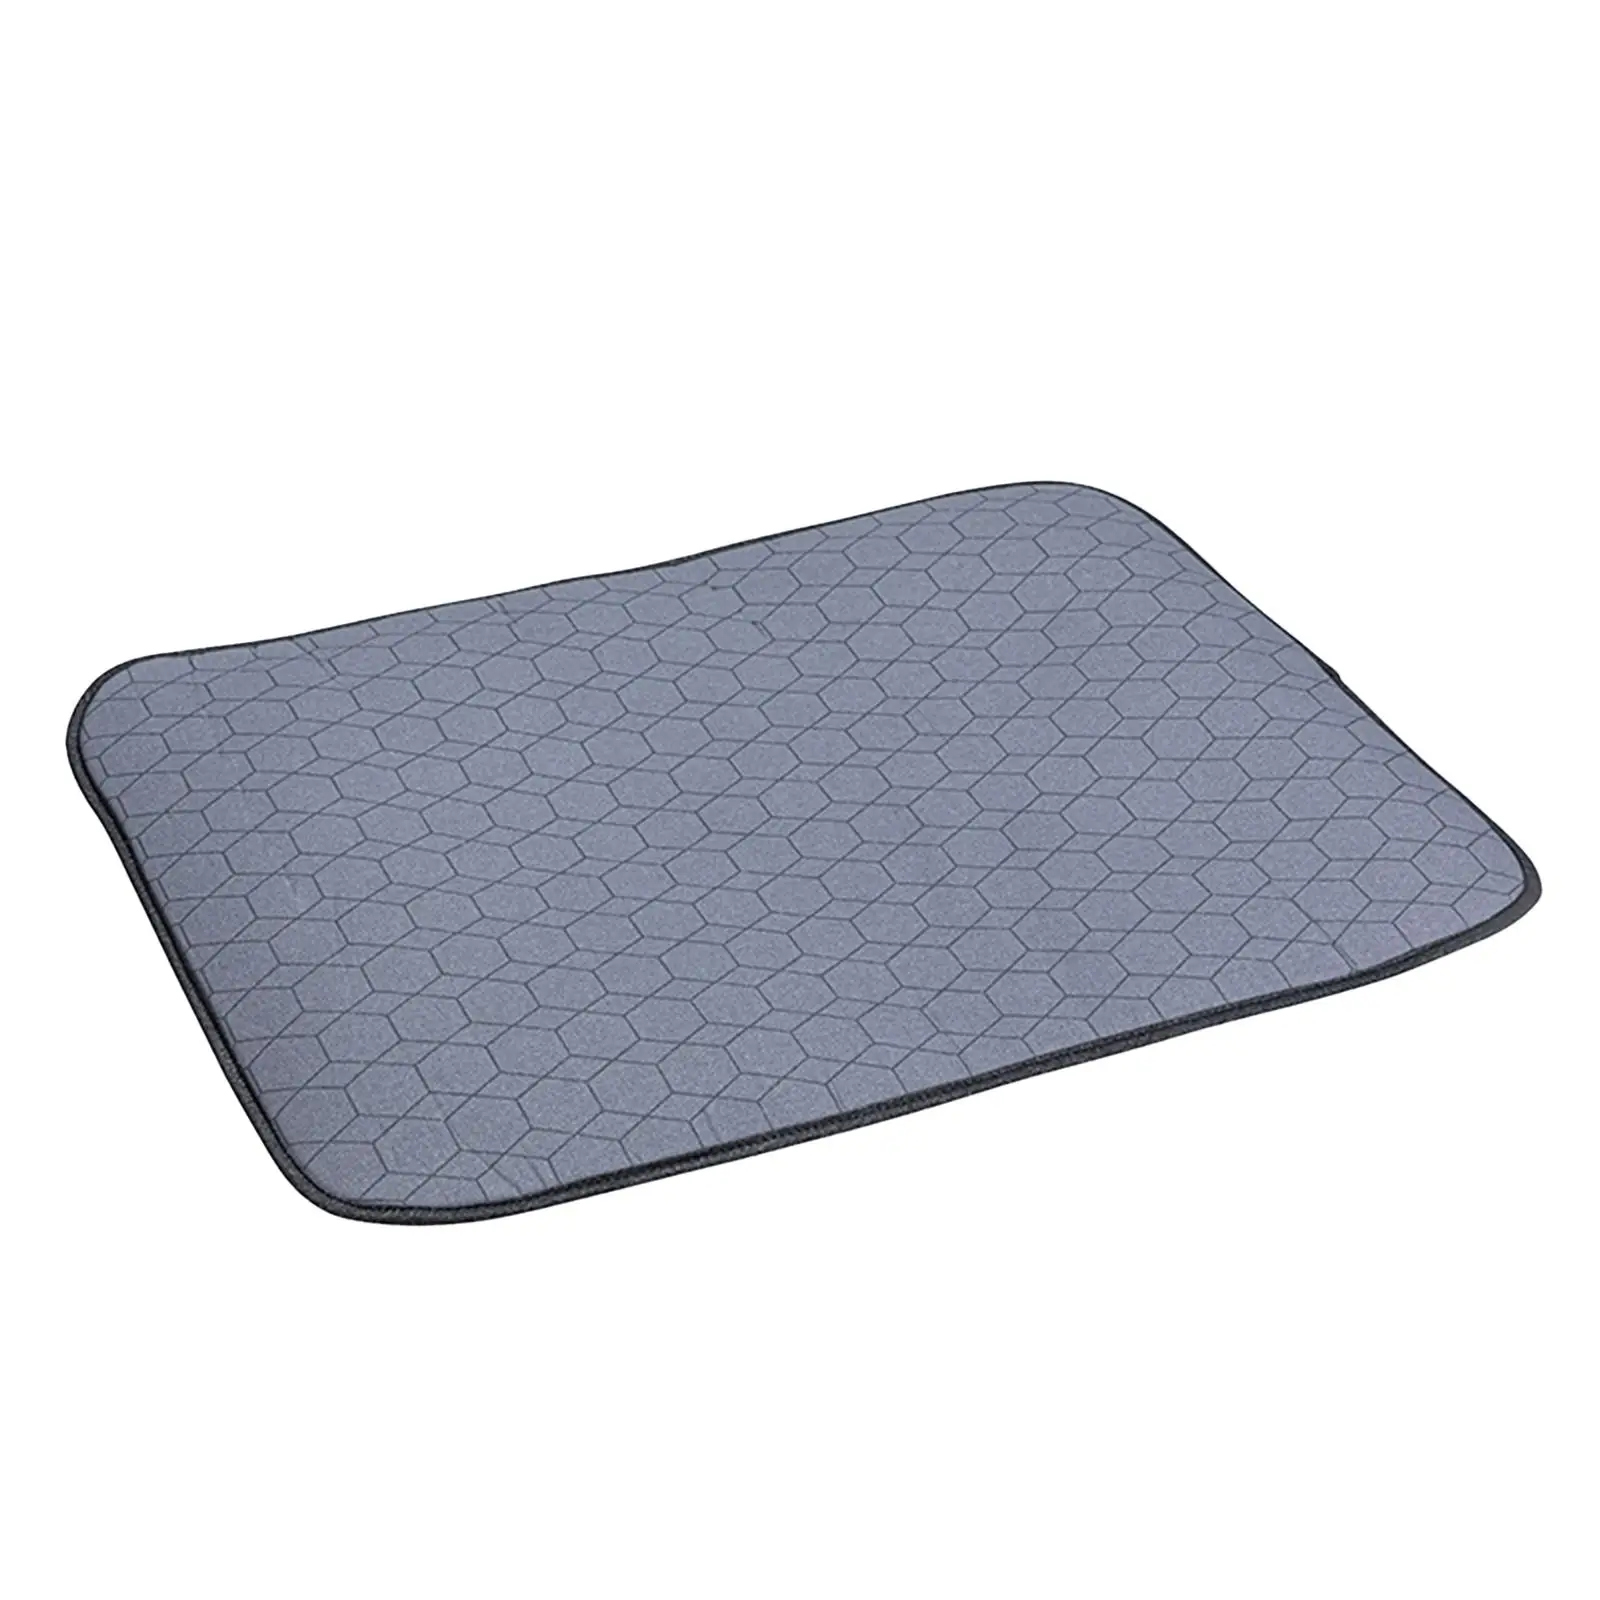 Ironing Mat Convenient Portable Tabletop Iron Board Sleeve Rack Ironing Board for Sewing Room Apartment Dorm Household Clothes